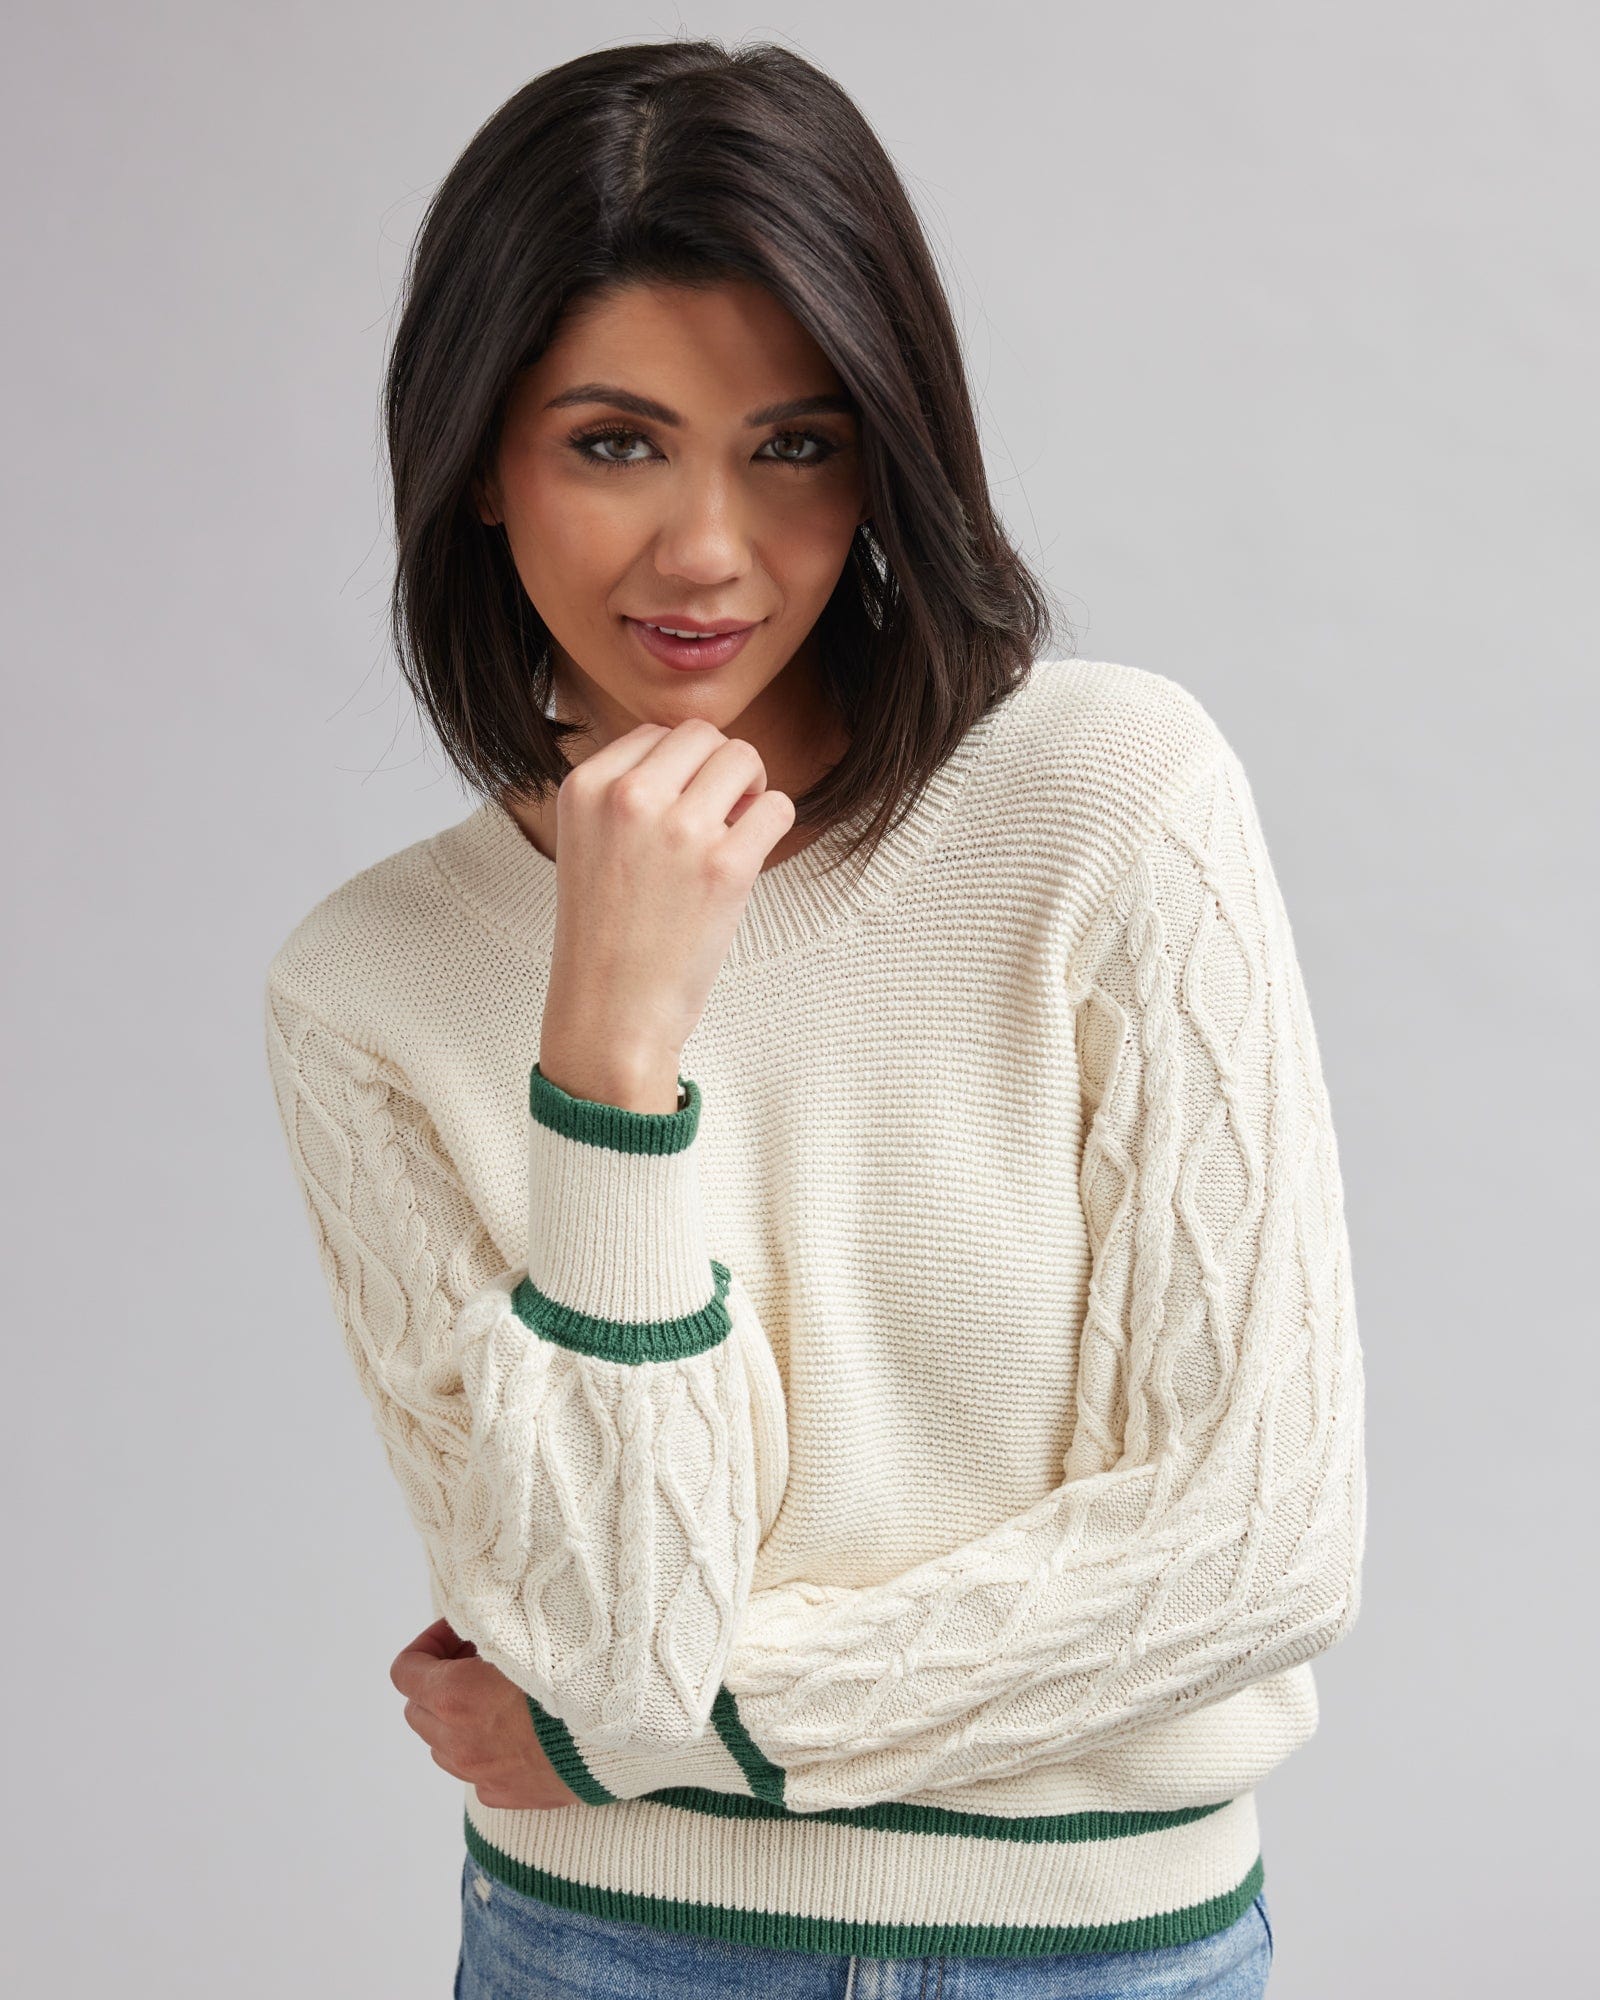 Woman in a cream colored sweater with green accents